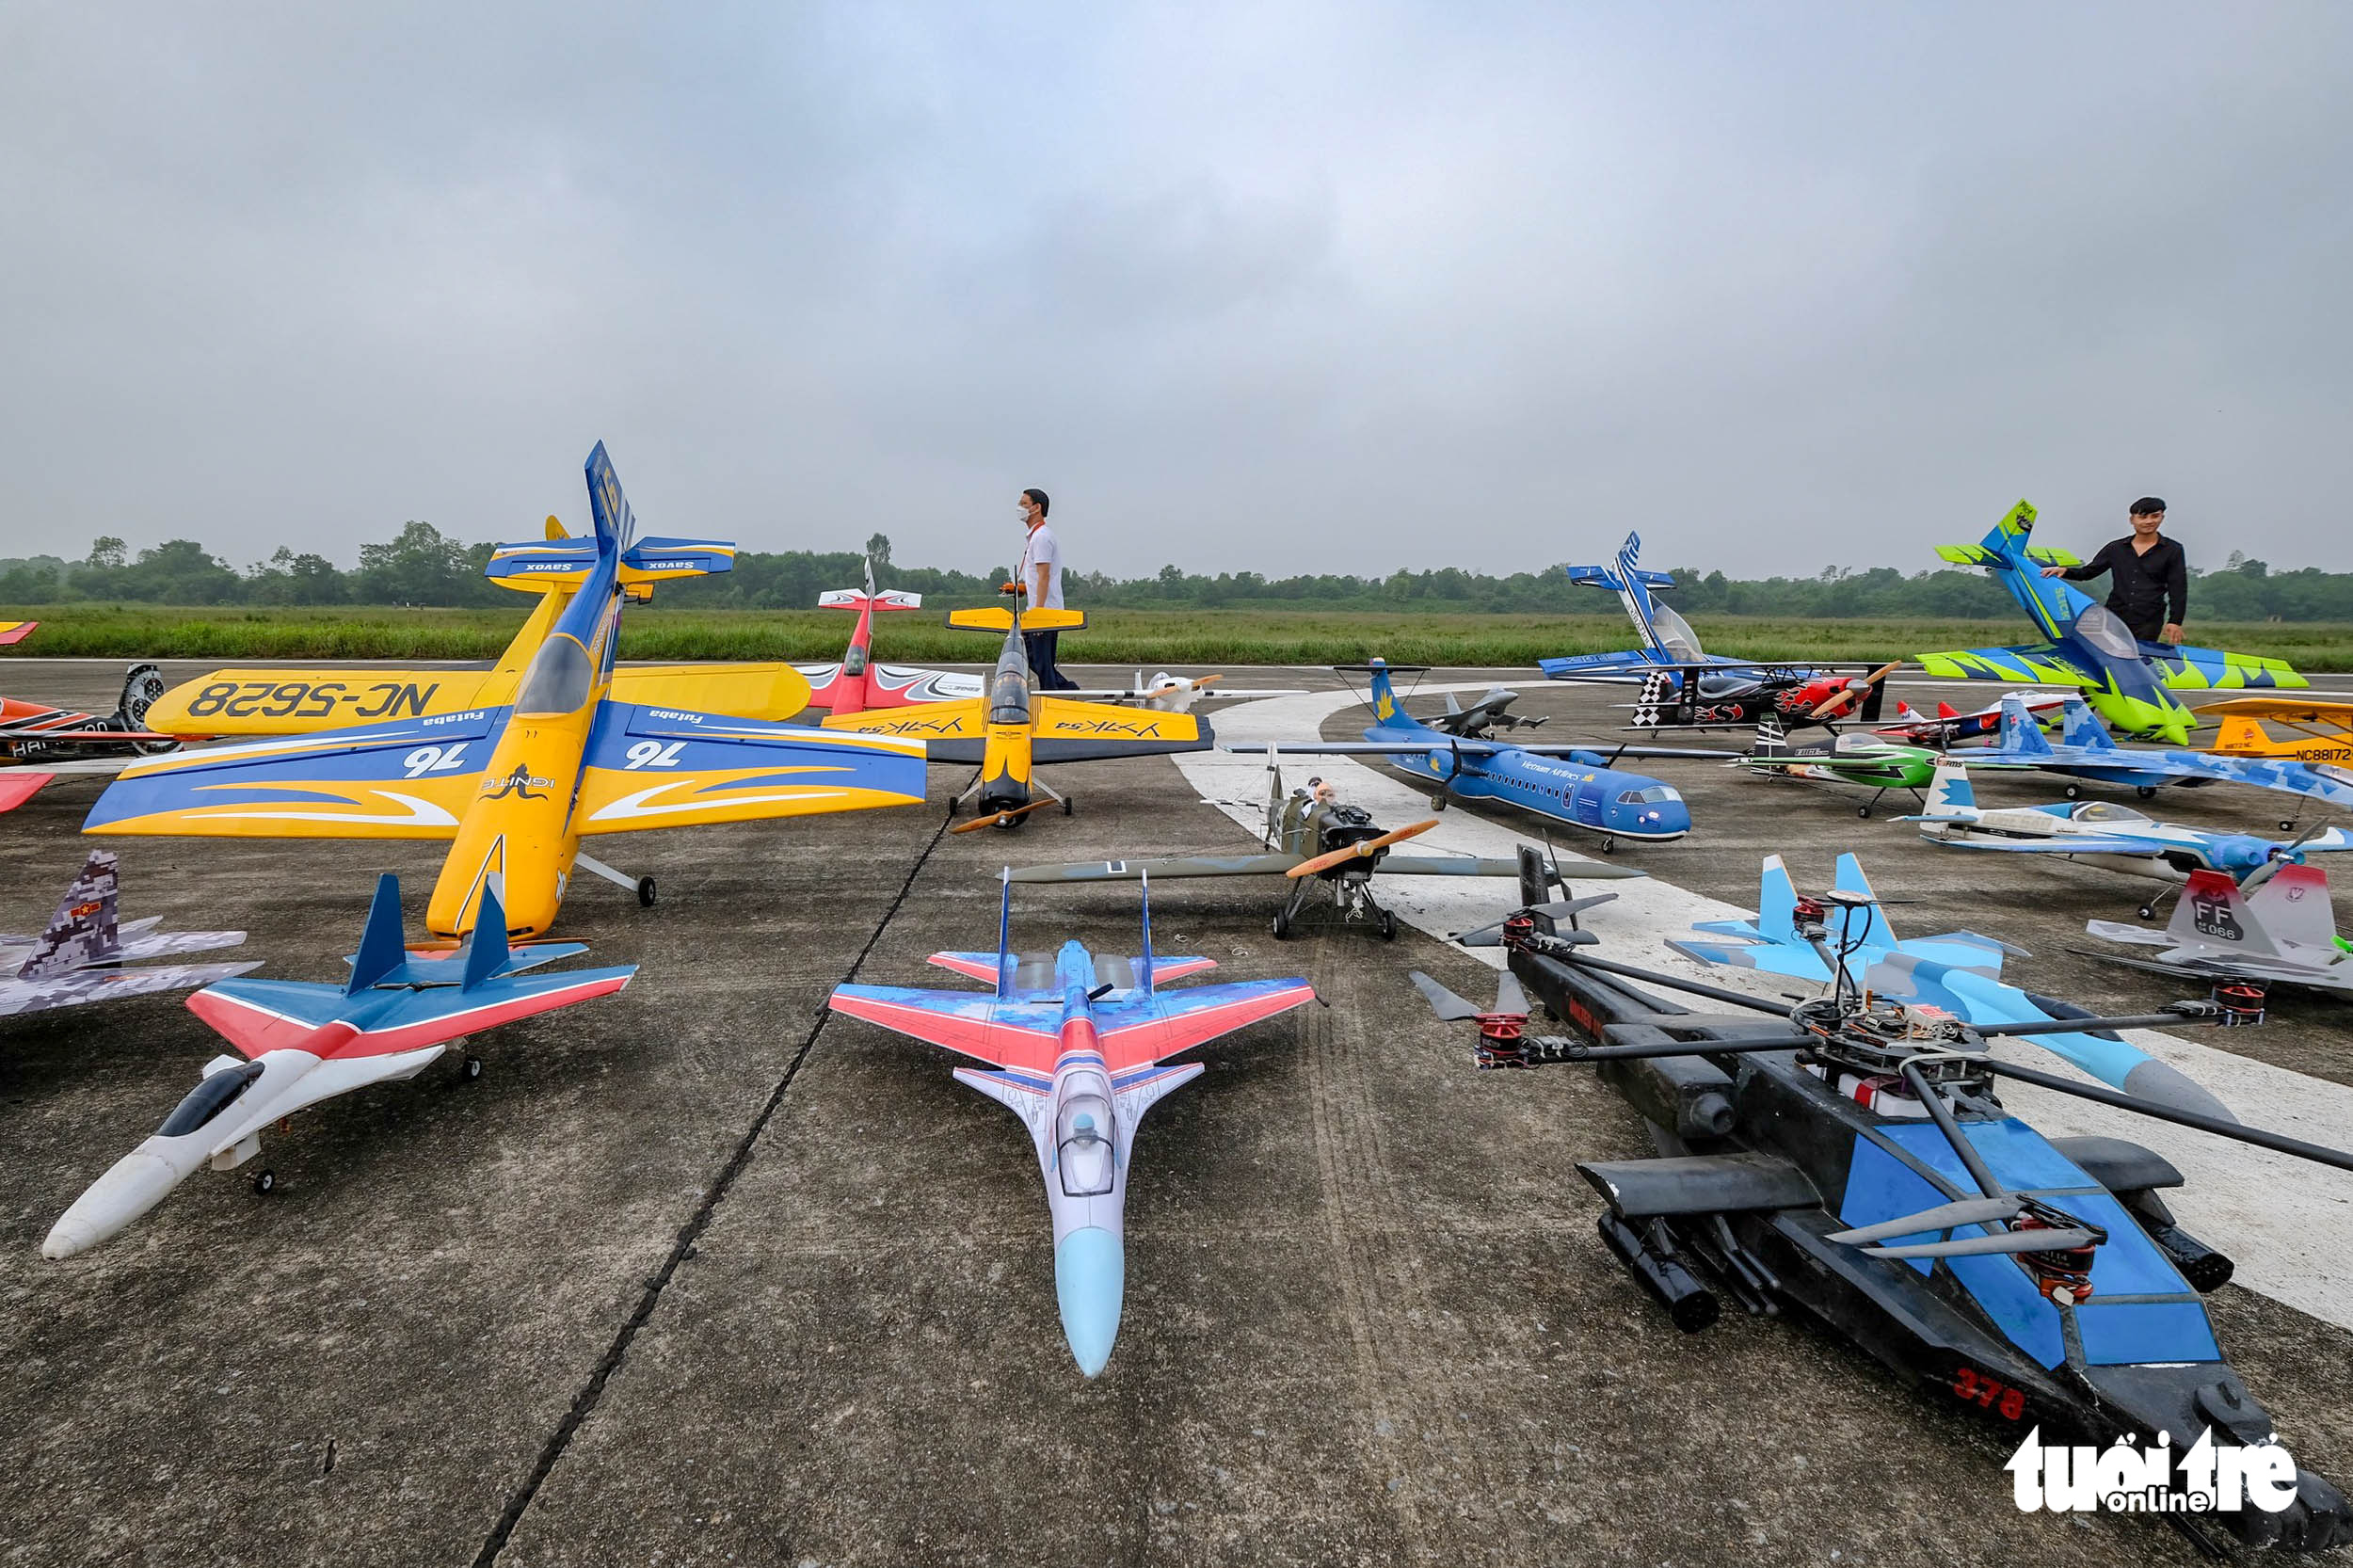 Model airplanes at the Funfly 2022 competition in Hanoi, April 23, 2022. Photo: Ha Quan / Tuoi Tre